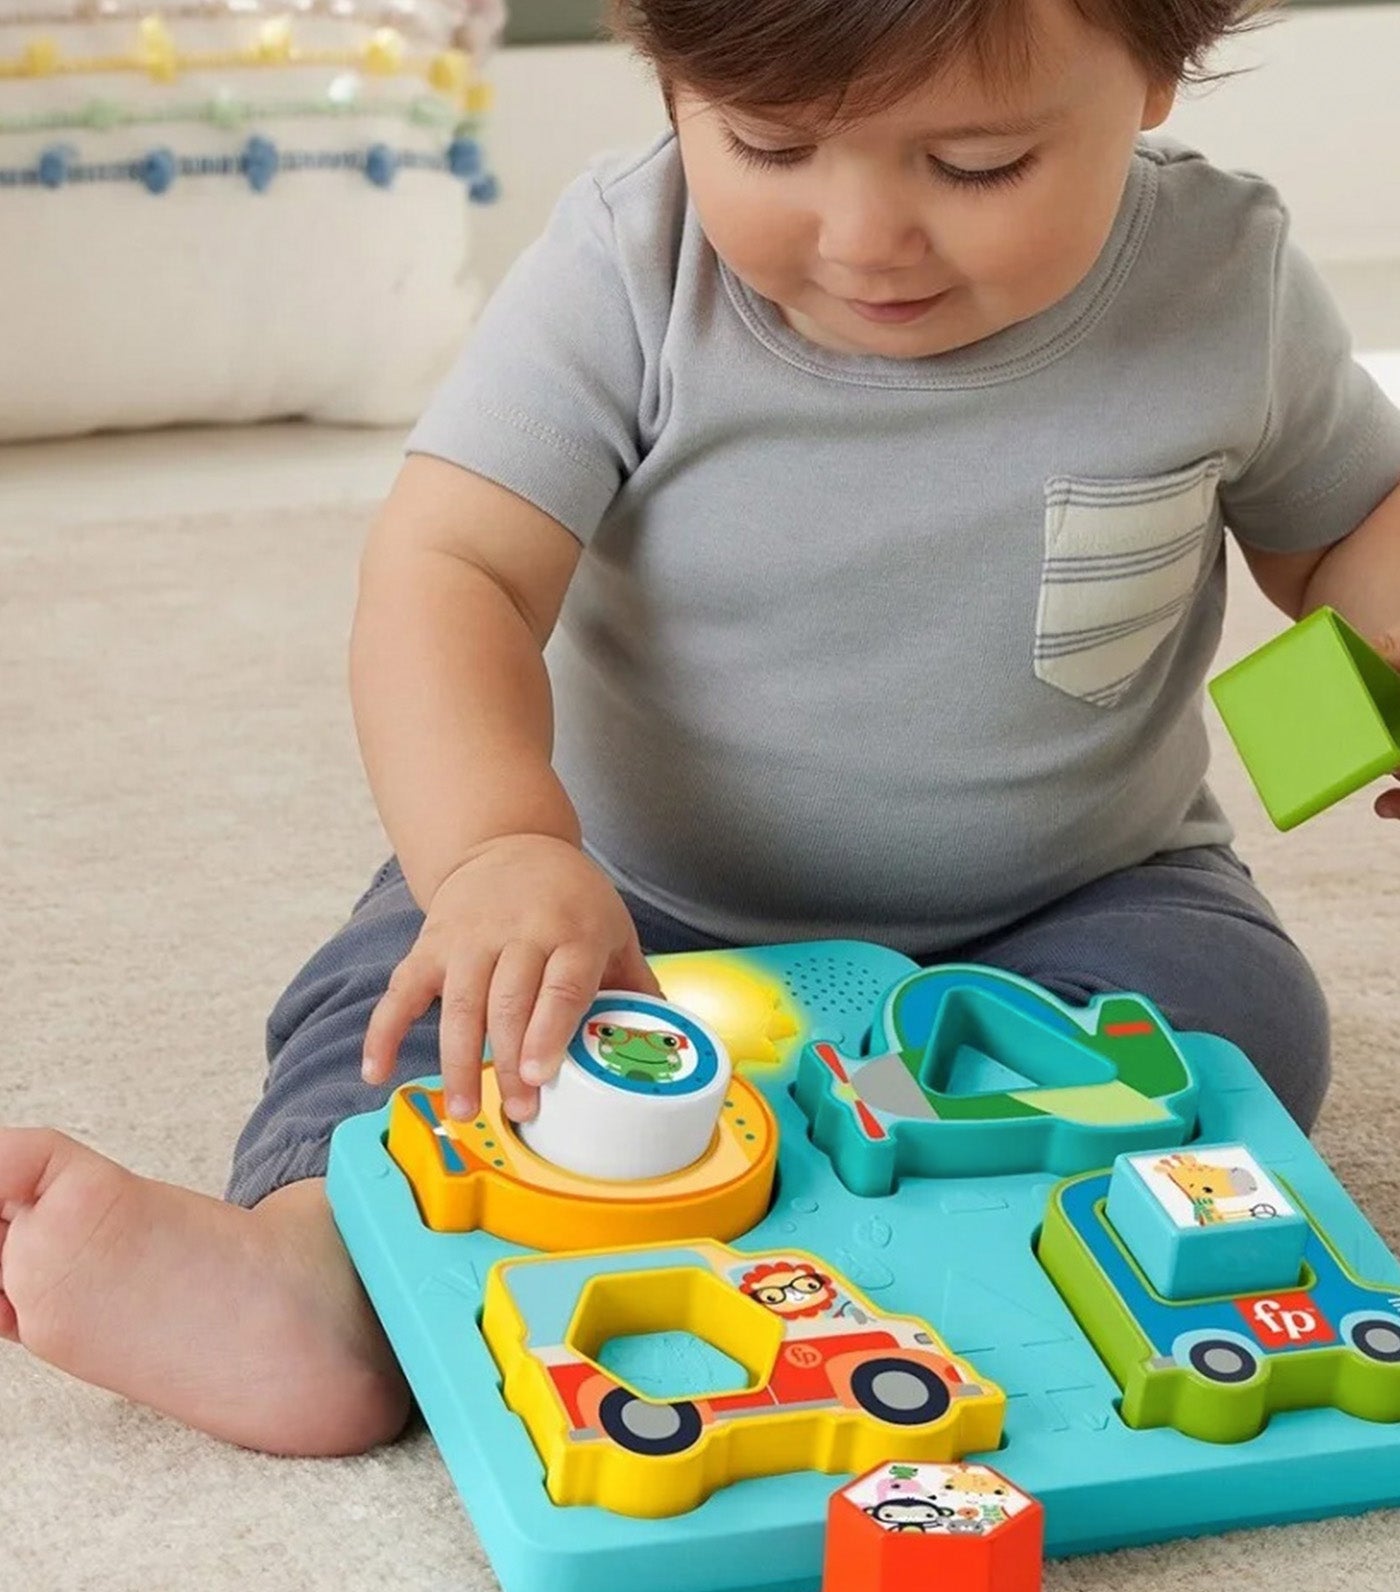 Shapes and Sounds Vehicle Puzzle